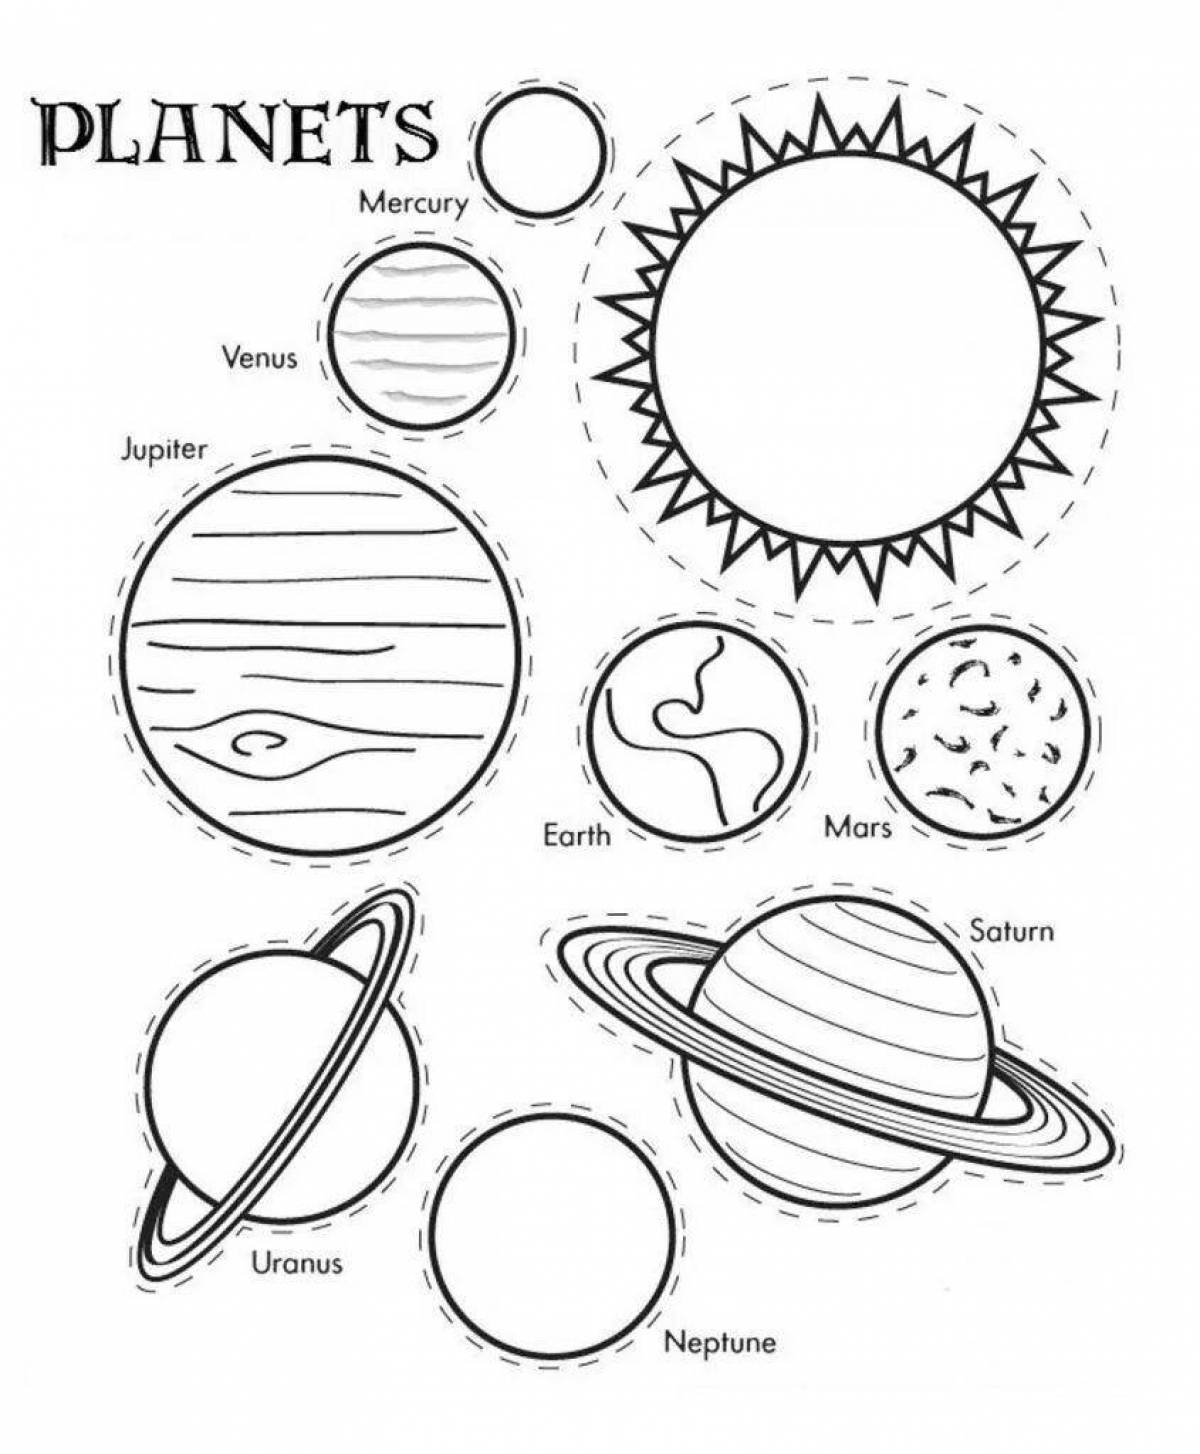 Intriguing pluto coloring book